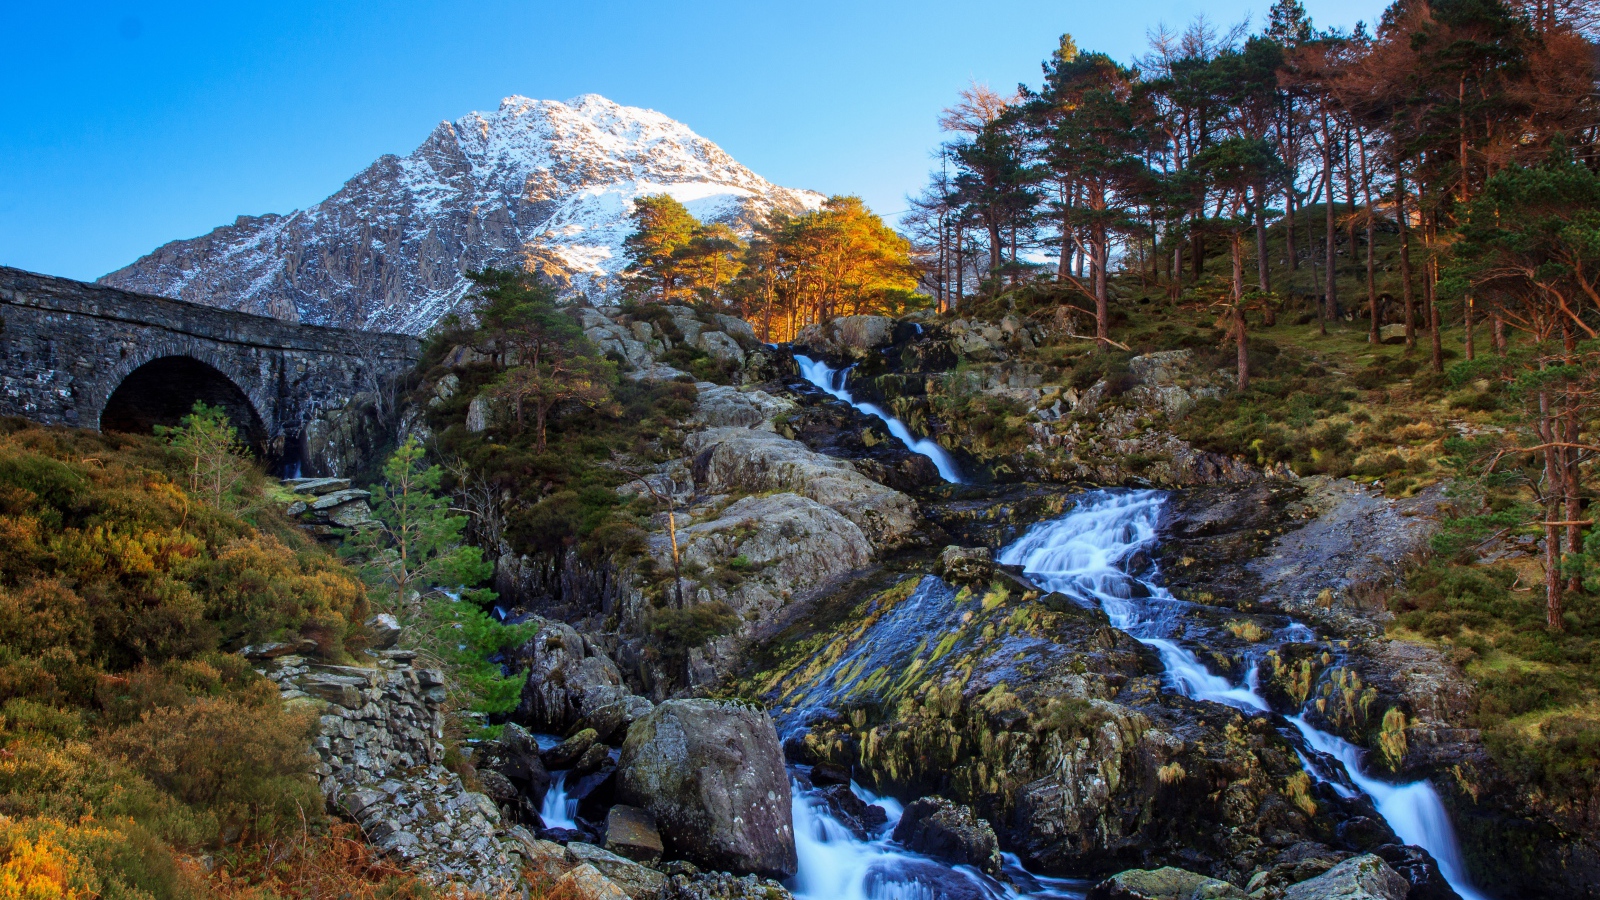 Mountain stream flows down the stones at the coniferous forest